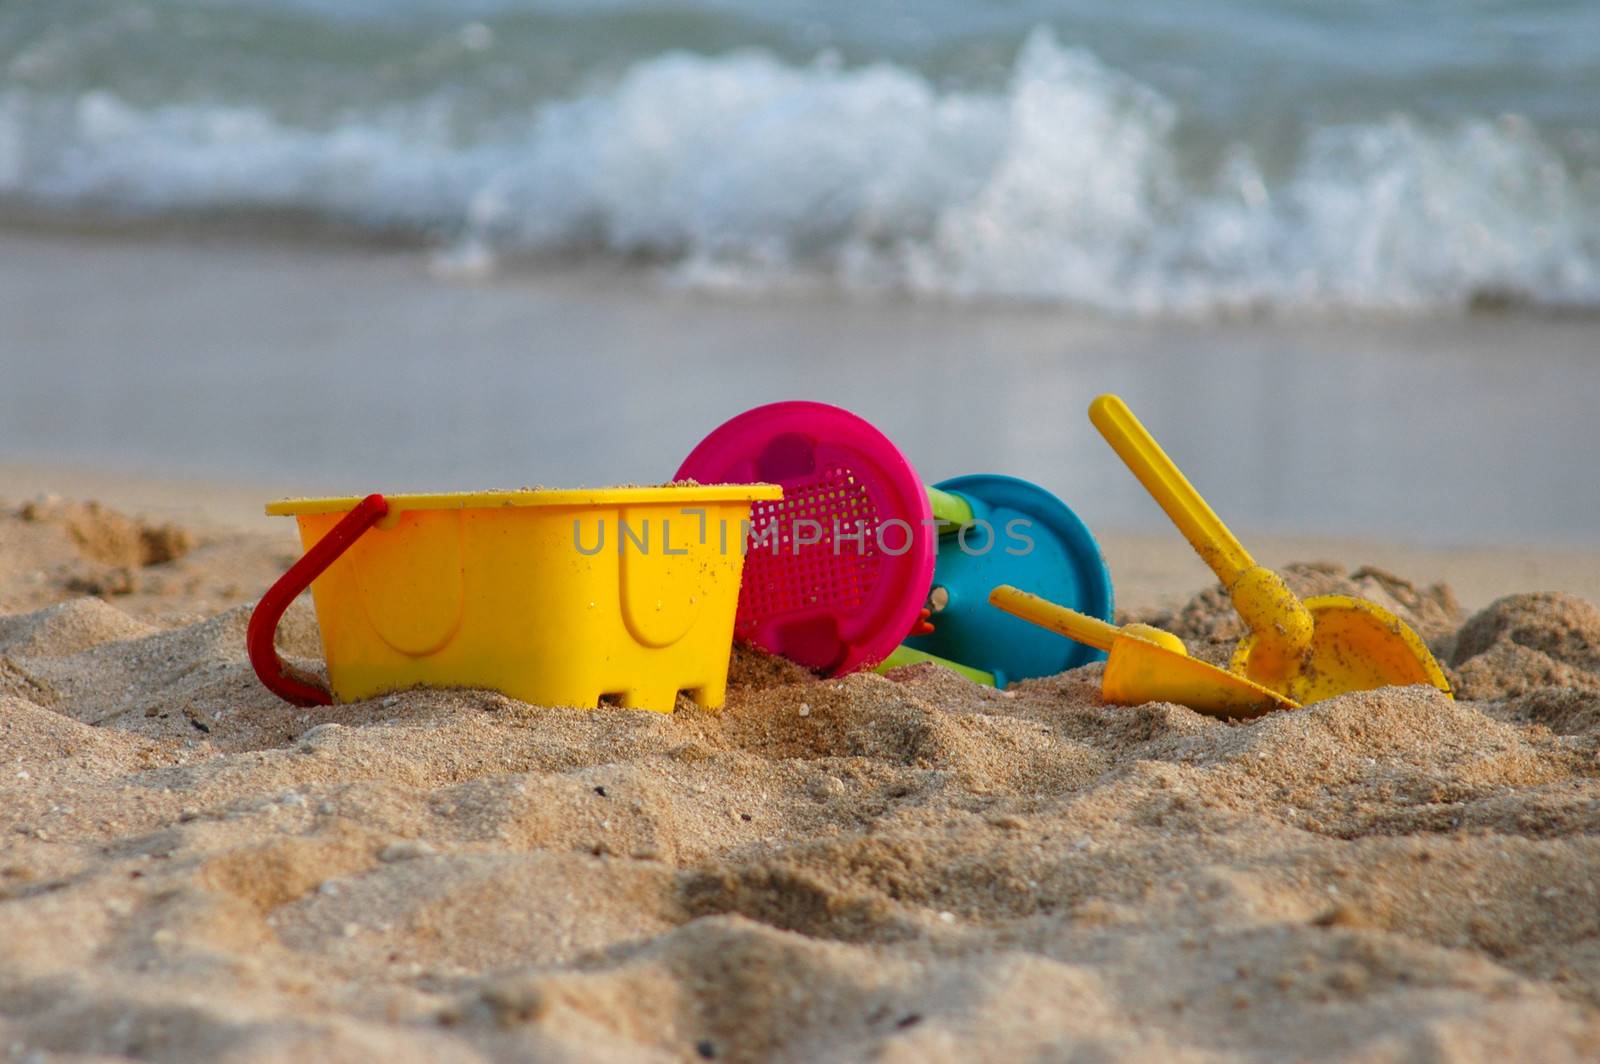 Vacation image of children's beach toys on the sand